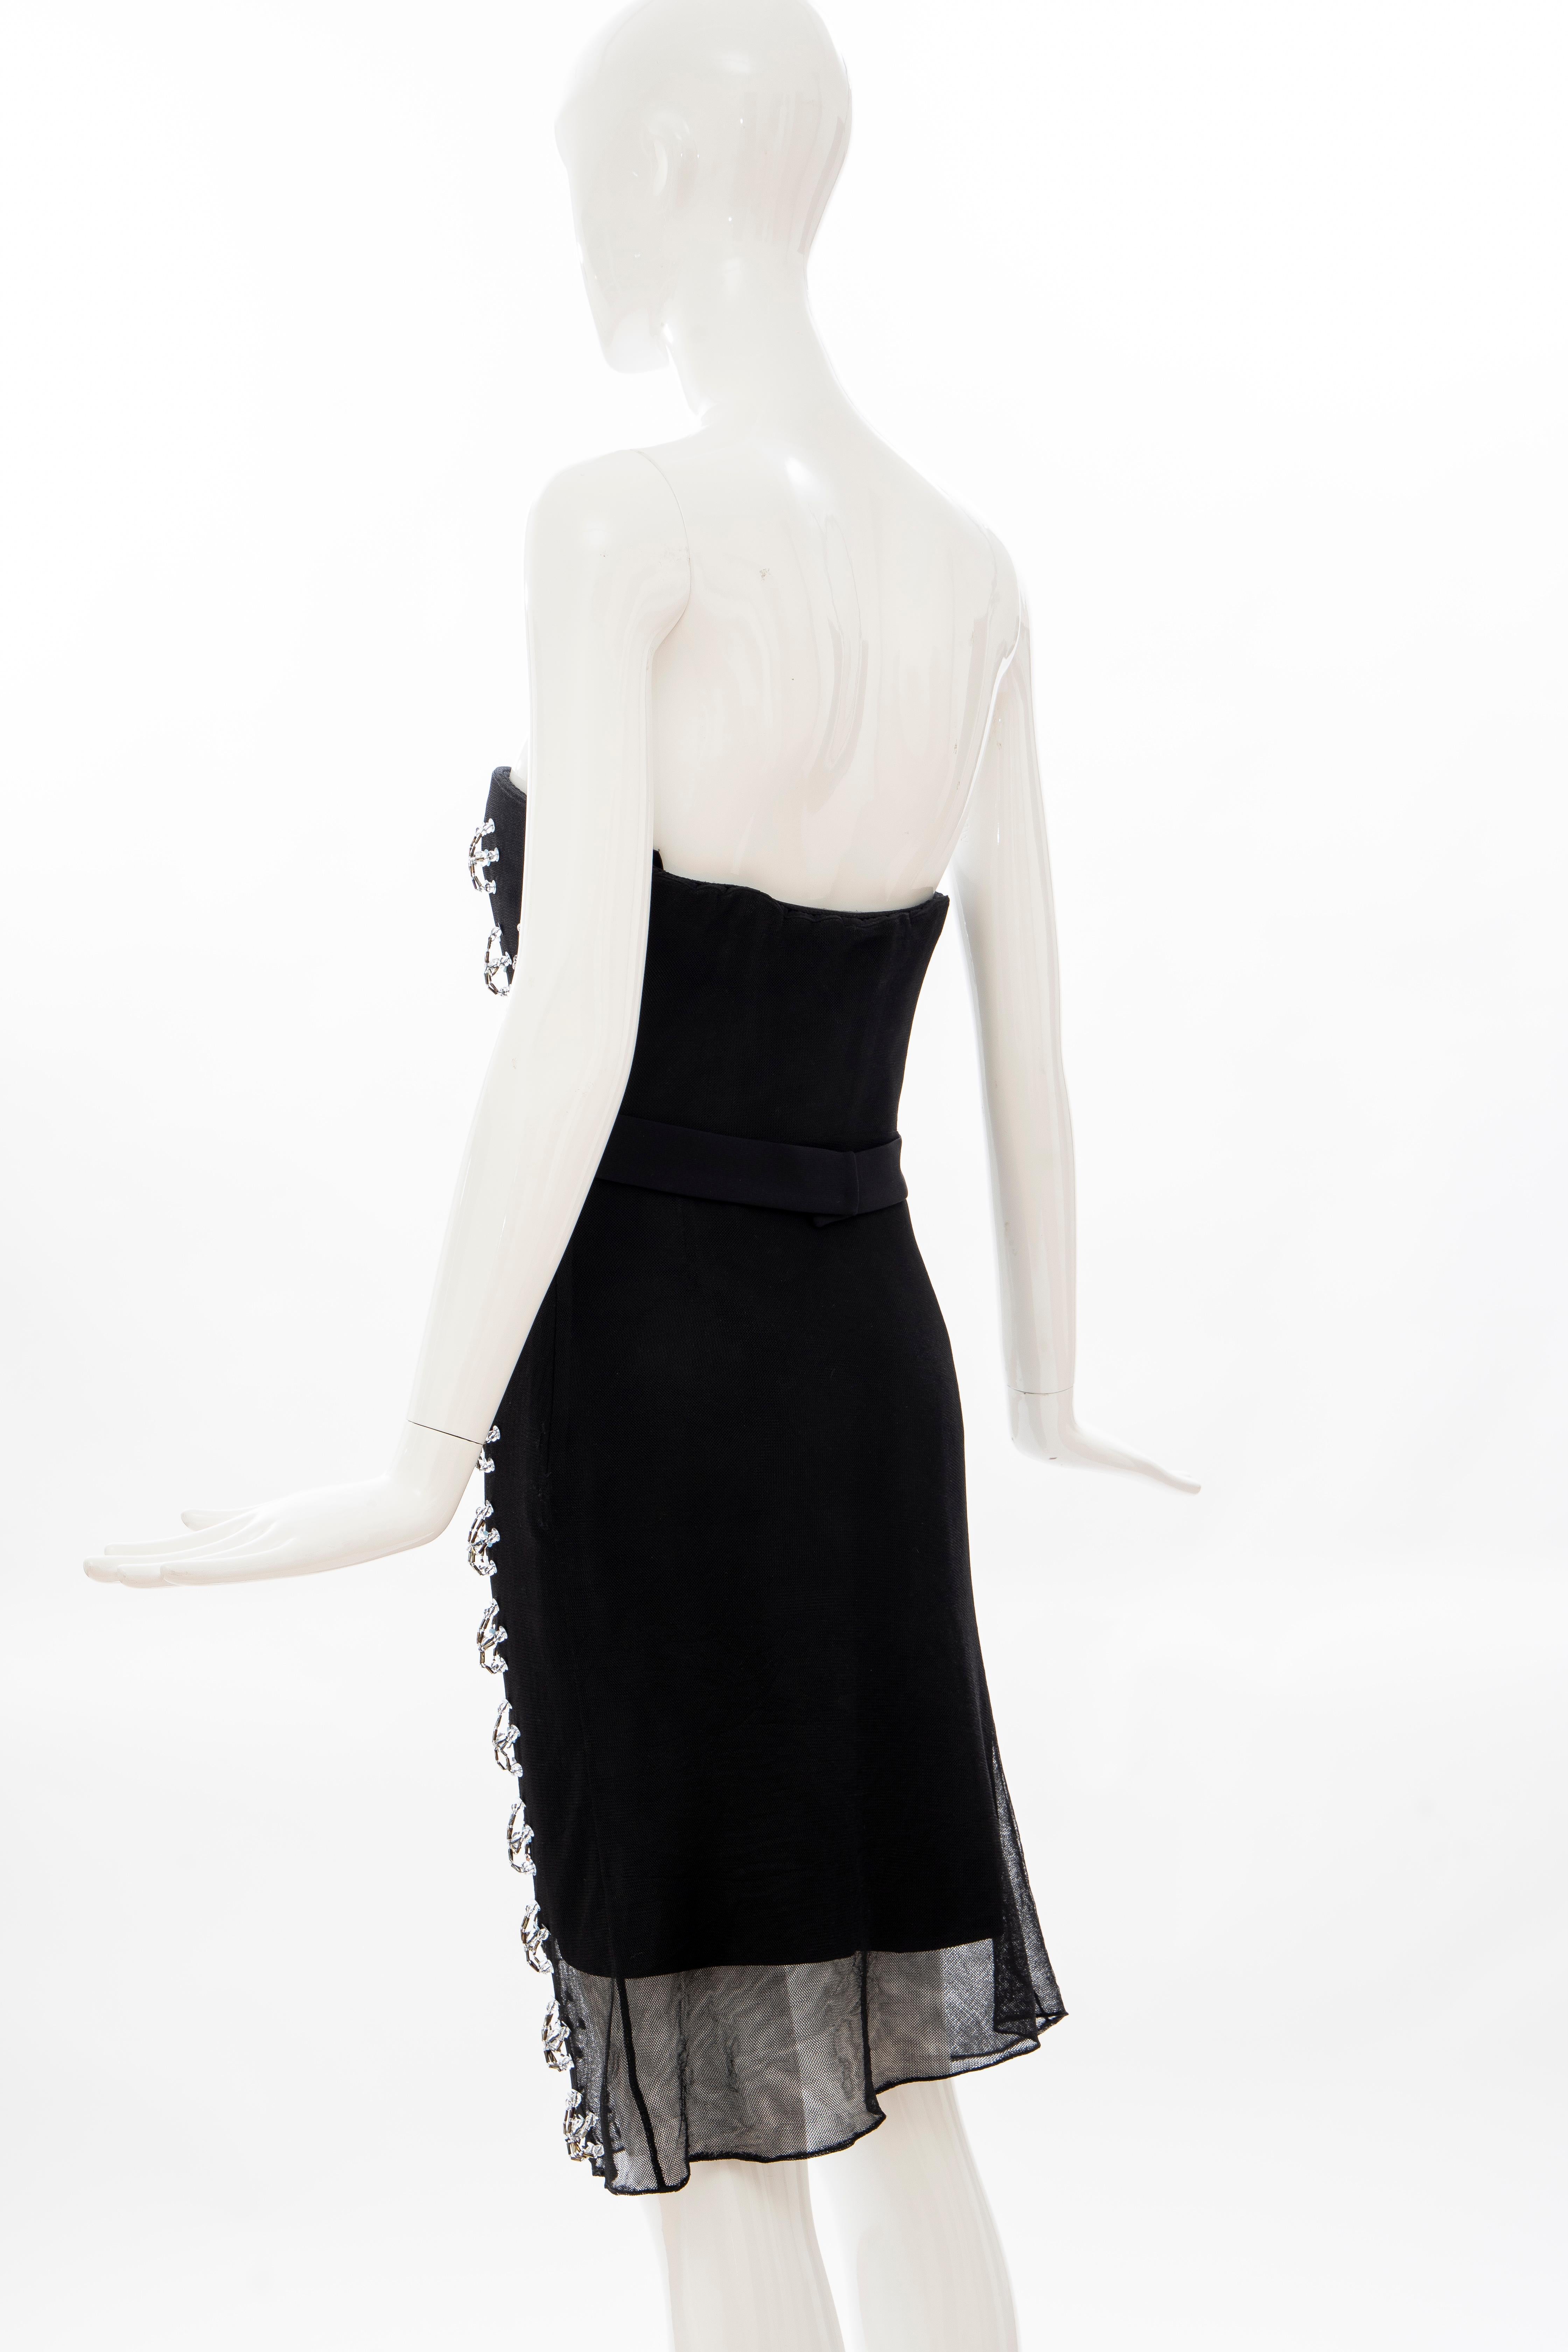 Raf Simons for Christian Dior Runway Strapless Embroidered Dress, Spring 2013 For Sale 4